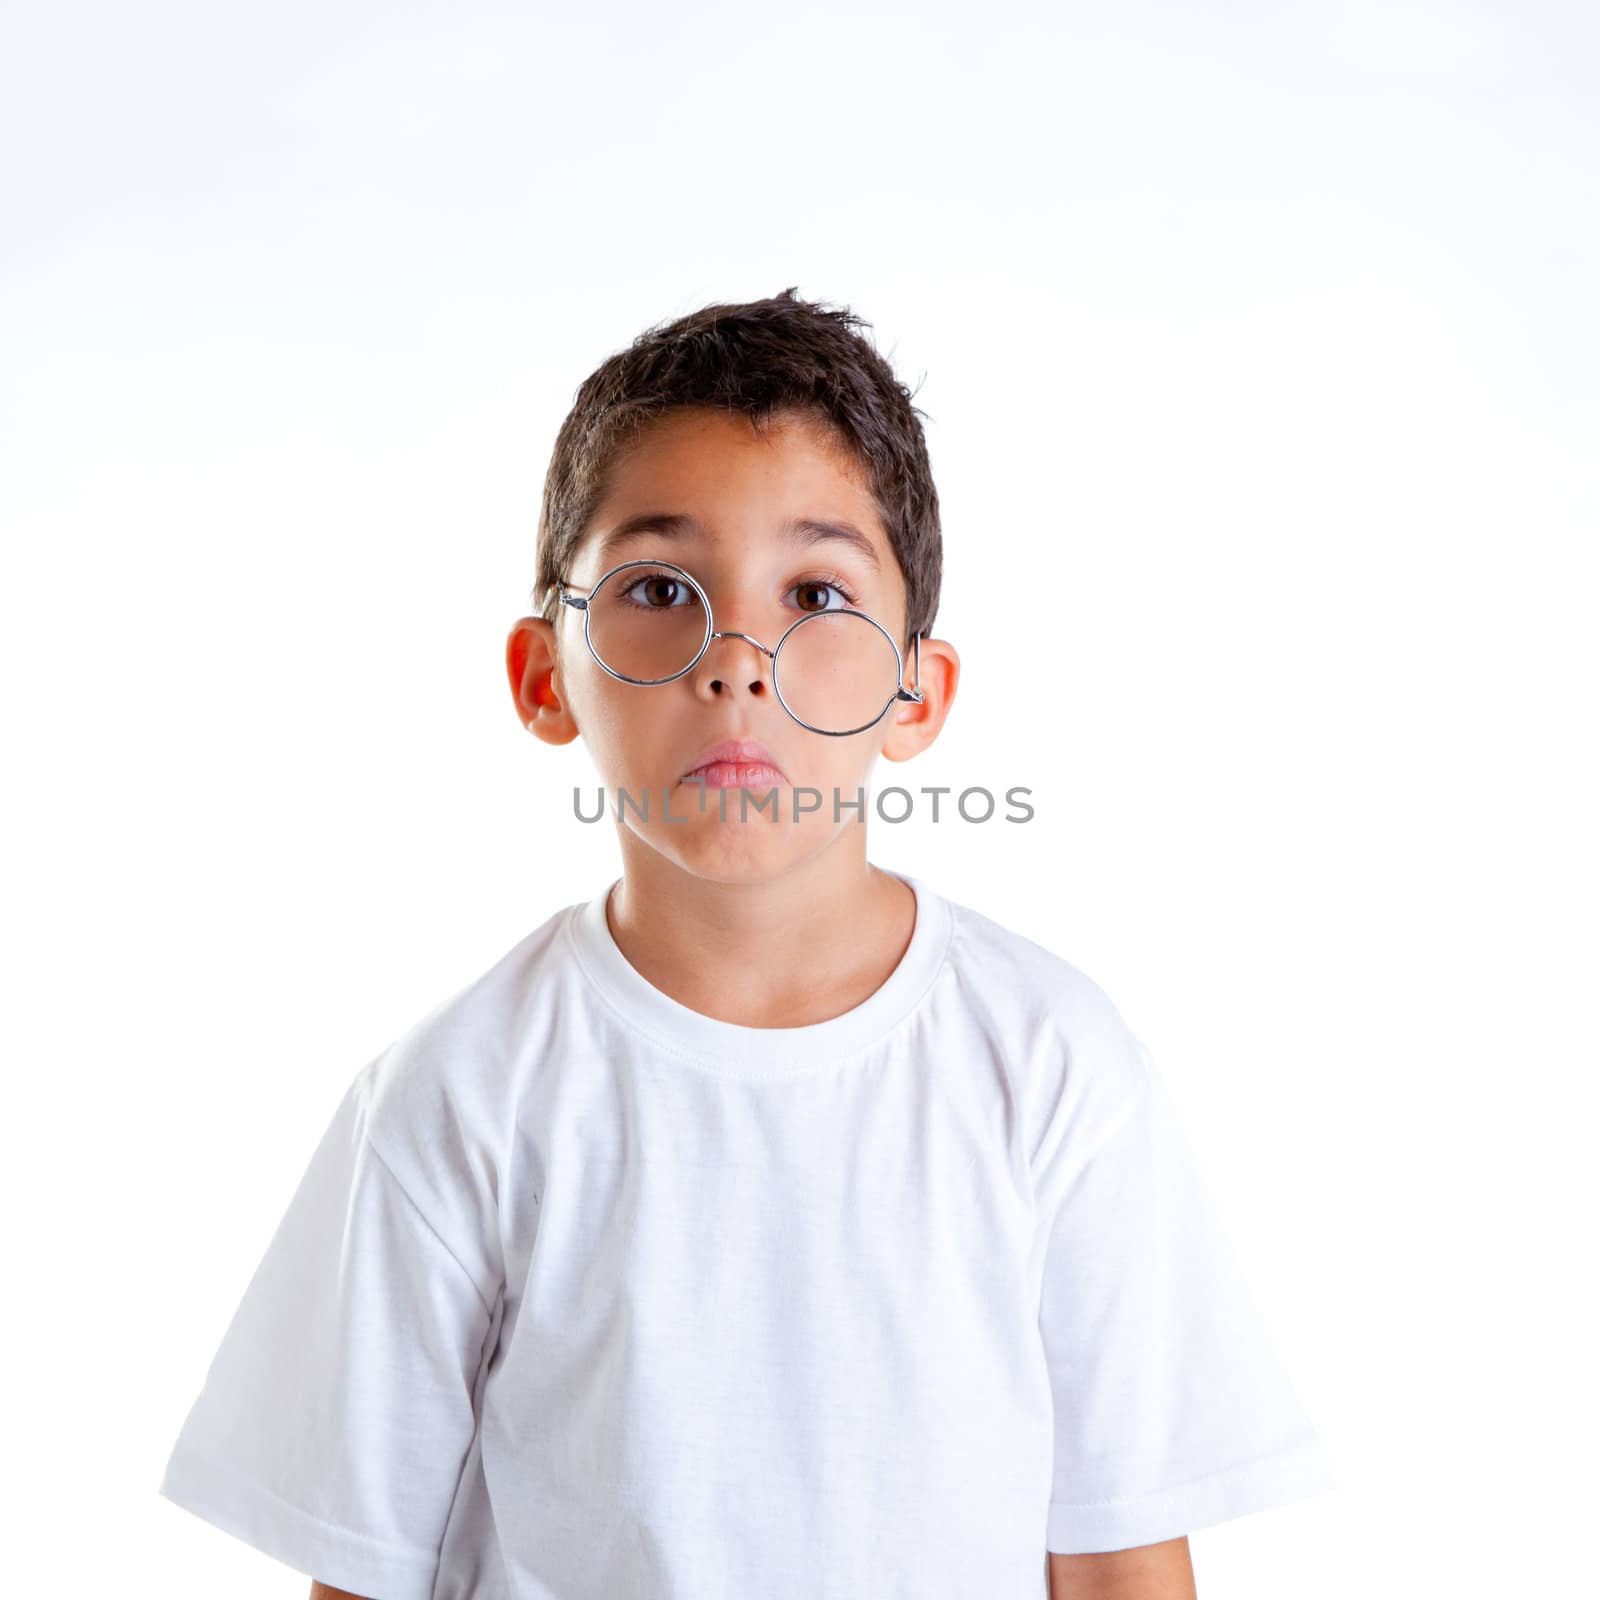 children nerd kid boy with glasses and silly expression isolated on white